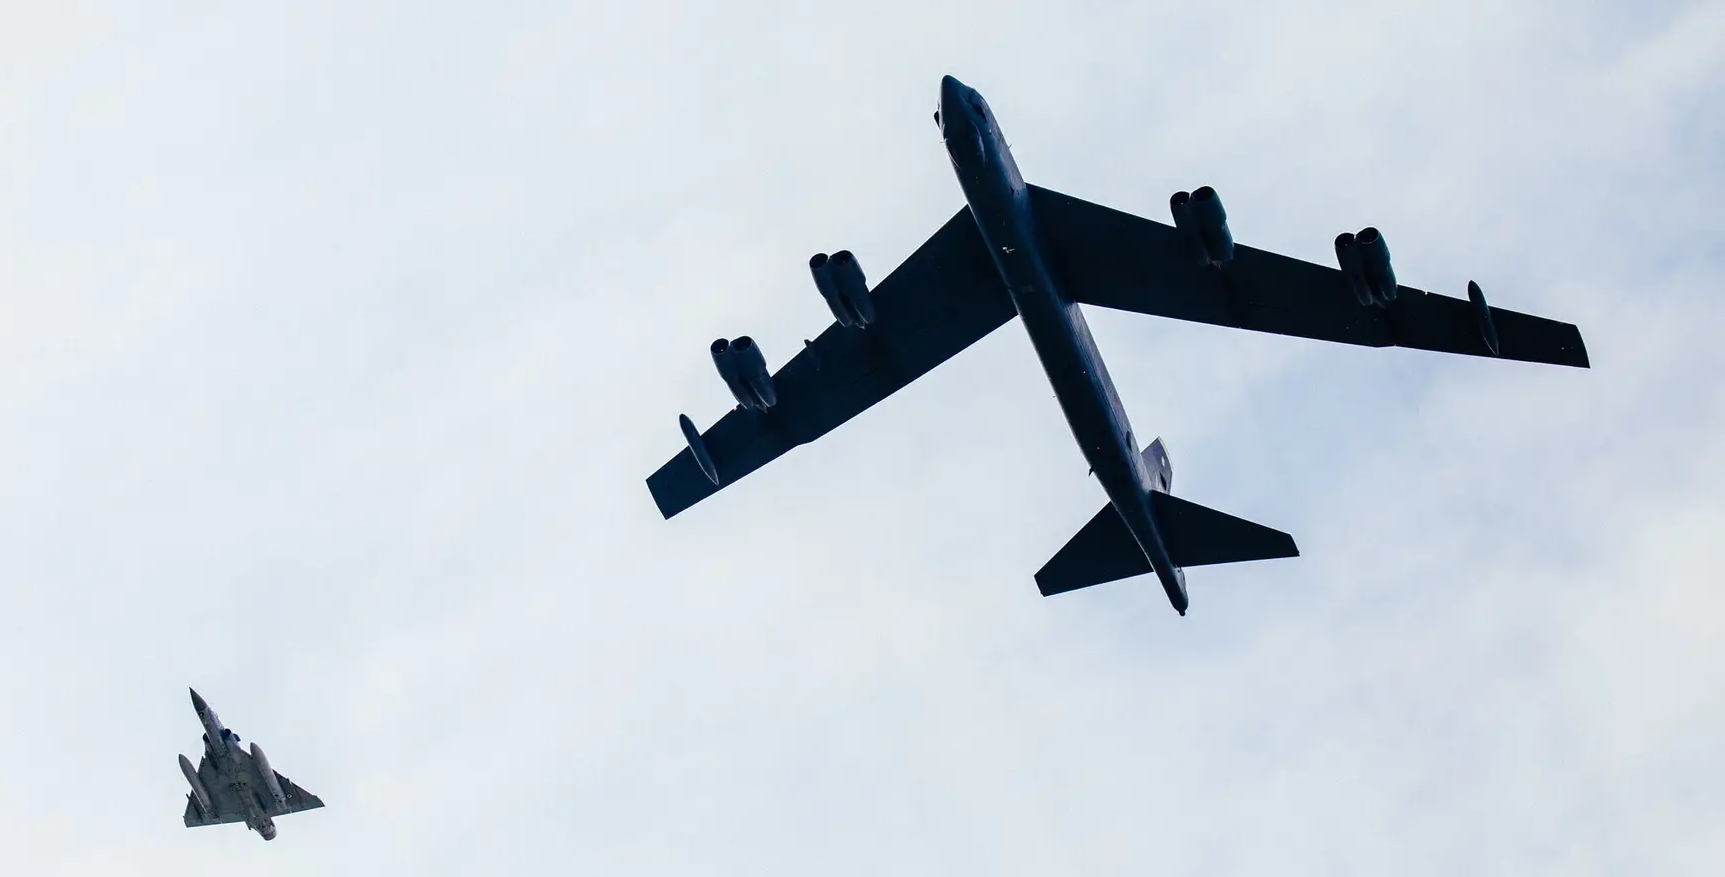 Video: B-52 Stratofortress nuclear bombers appear in Estonia 200km from the russian border